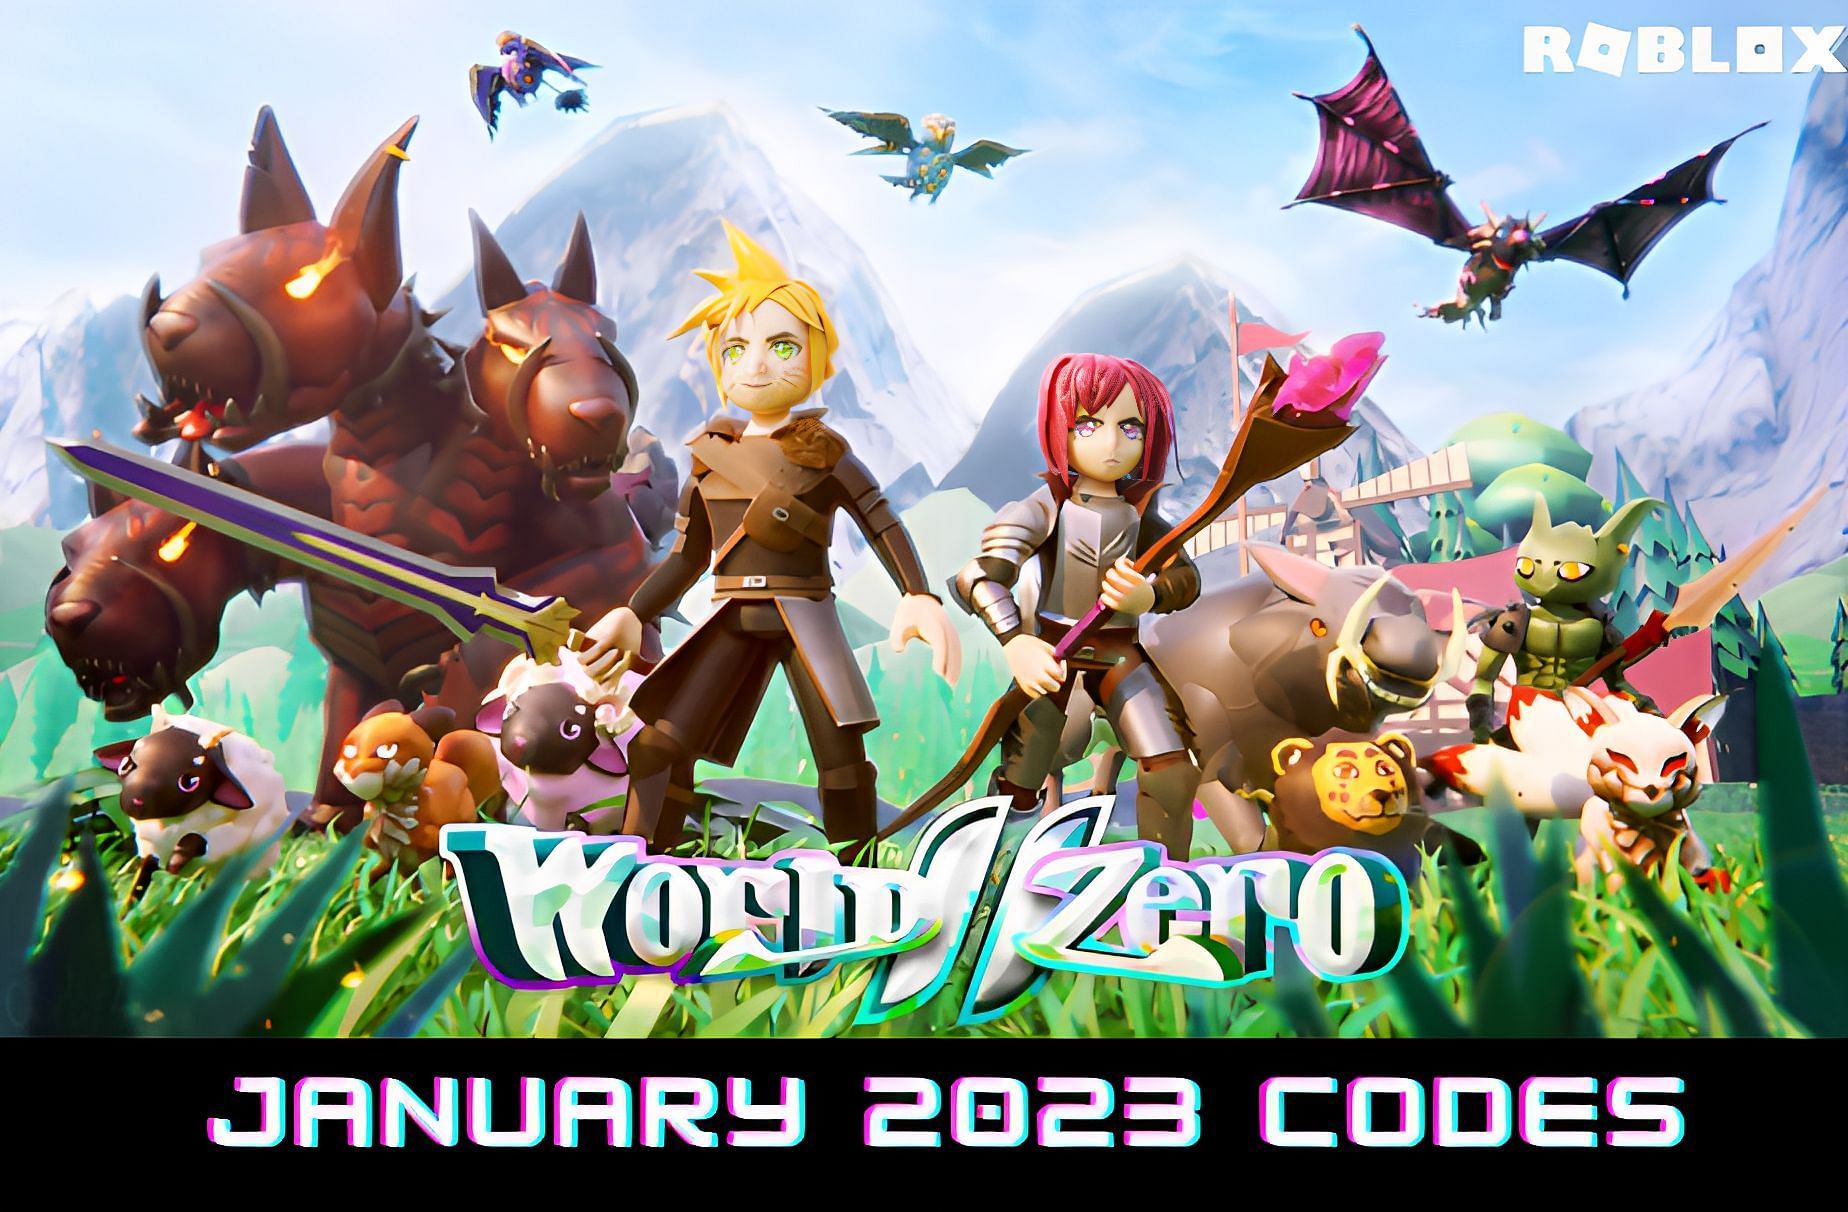 All Project New World codes (free in January 2023) • TechBriefly